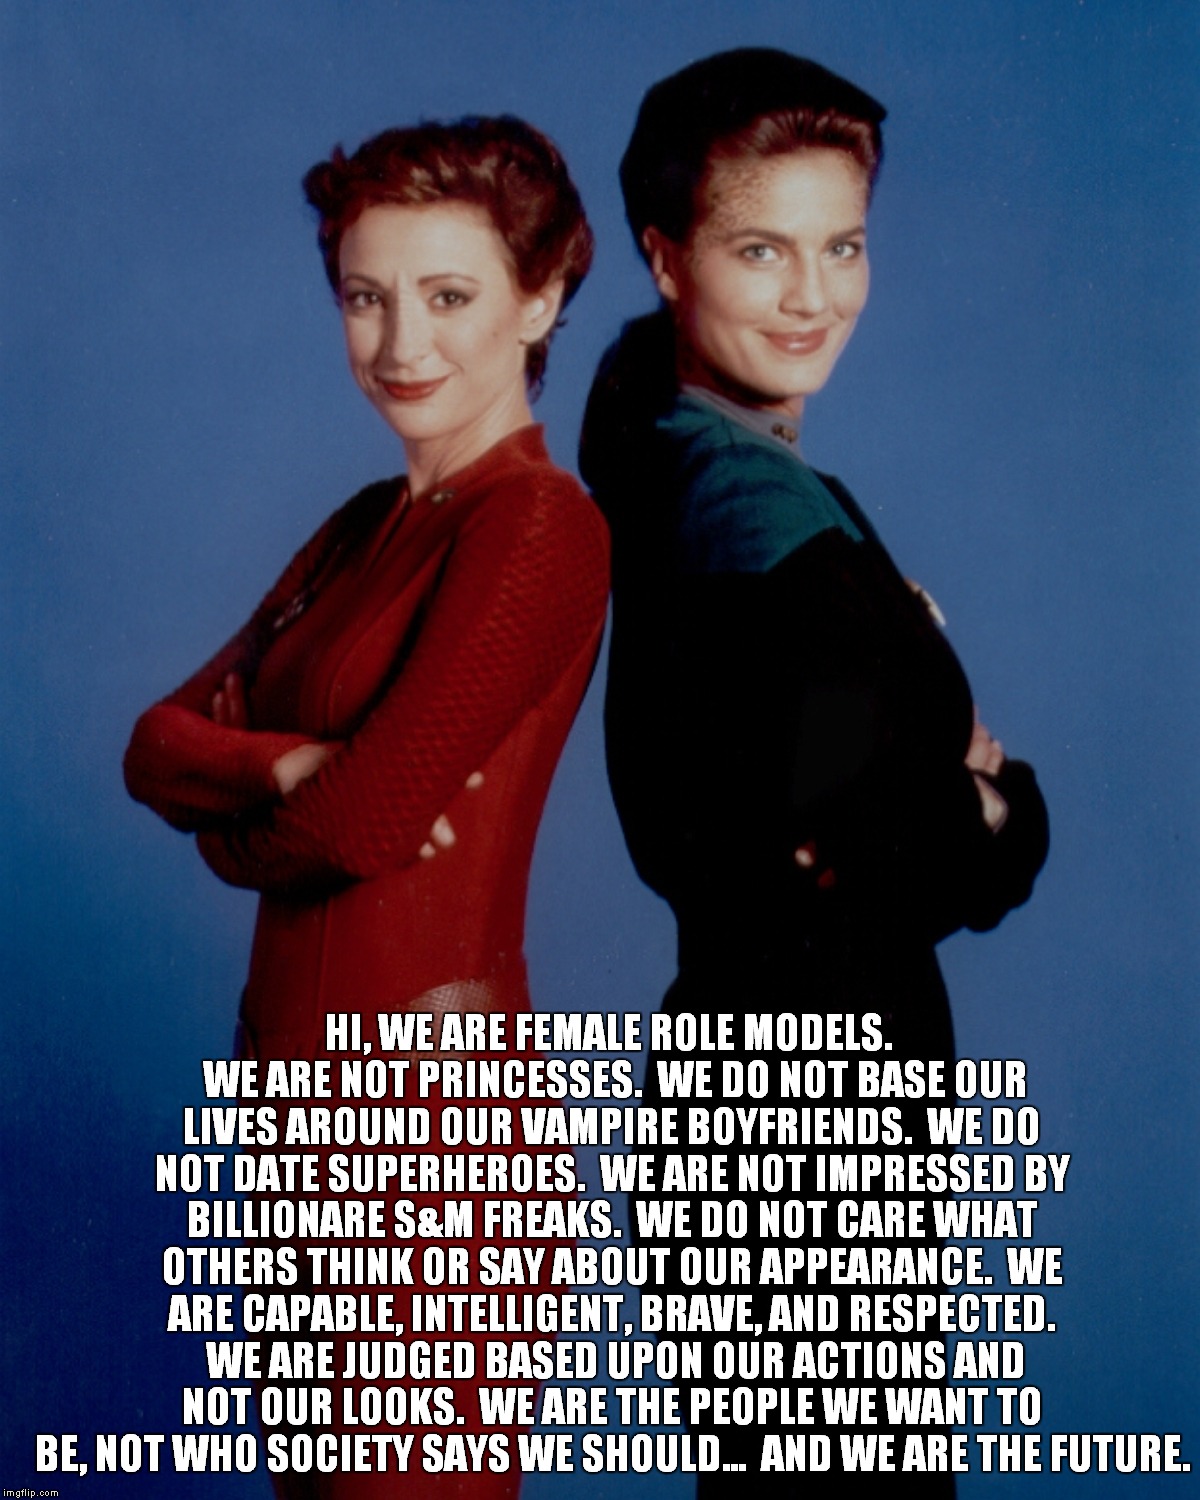 Kira and Dax | HI, WE ARE FEMALE ROLE MODELS.  WE ARE NOT PRINCESSES.  WE DO NOT BASE OUR LIVES AROUND OUR VAMPIRE BOYFRIENDS.  WE DO NOT DATE SUPERHEROES. | image tagged in star trek | made w/ Imgflip meme maker